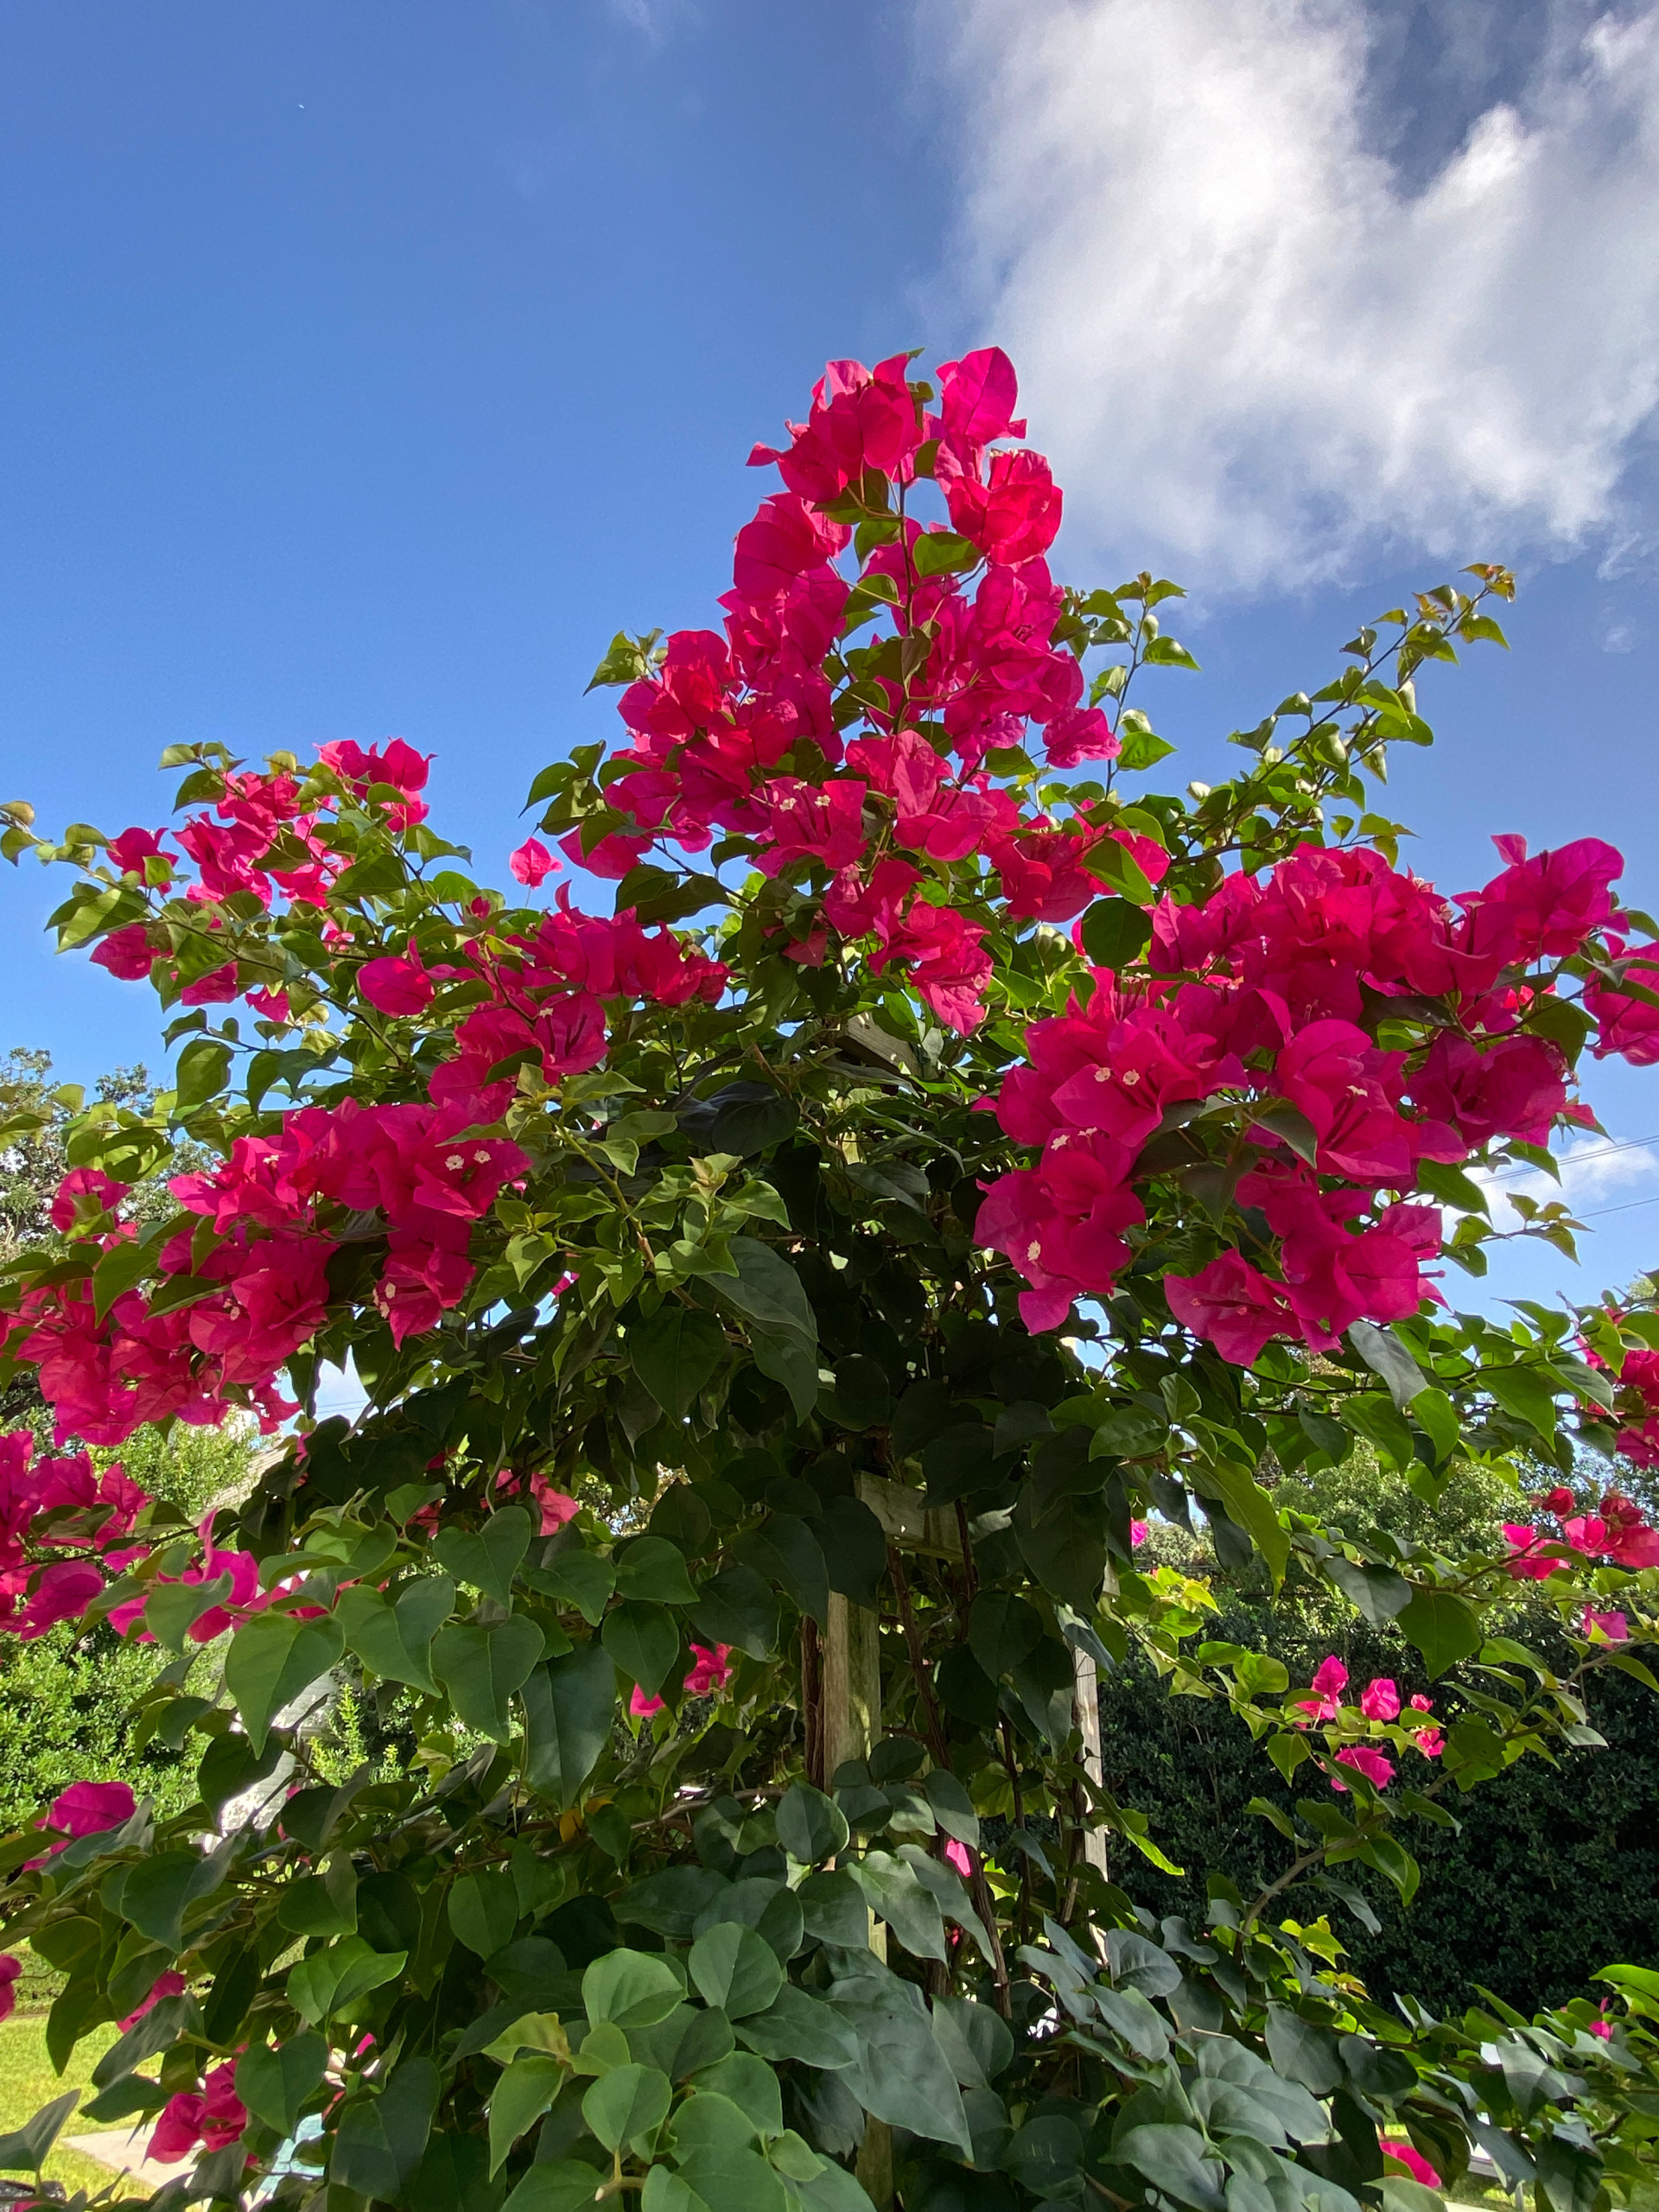 Bougainvillea and being poolside seems right for a Houston summer.